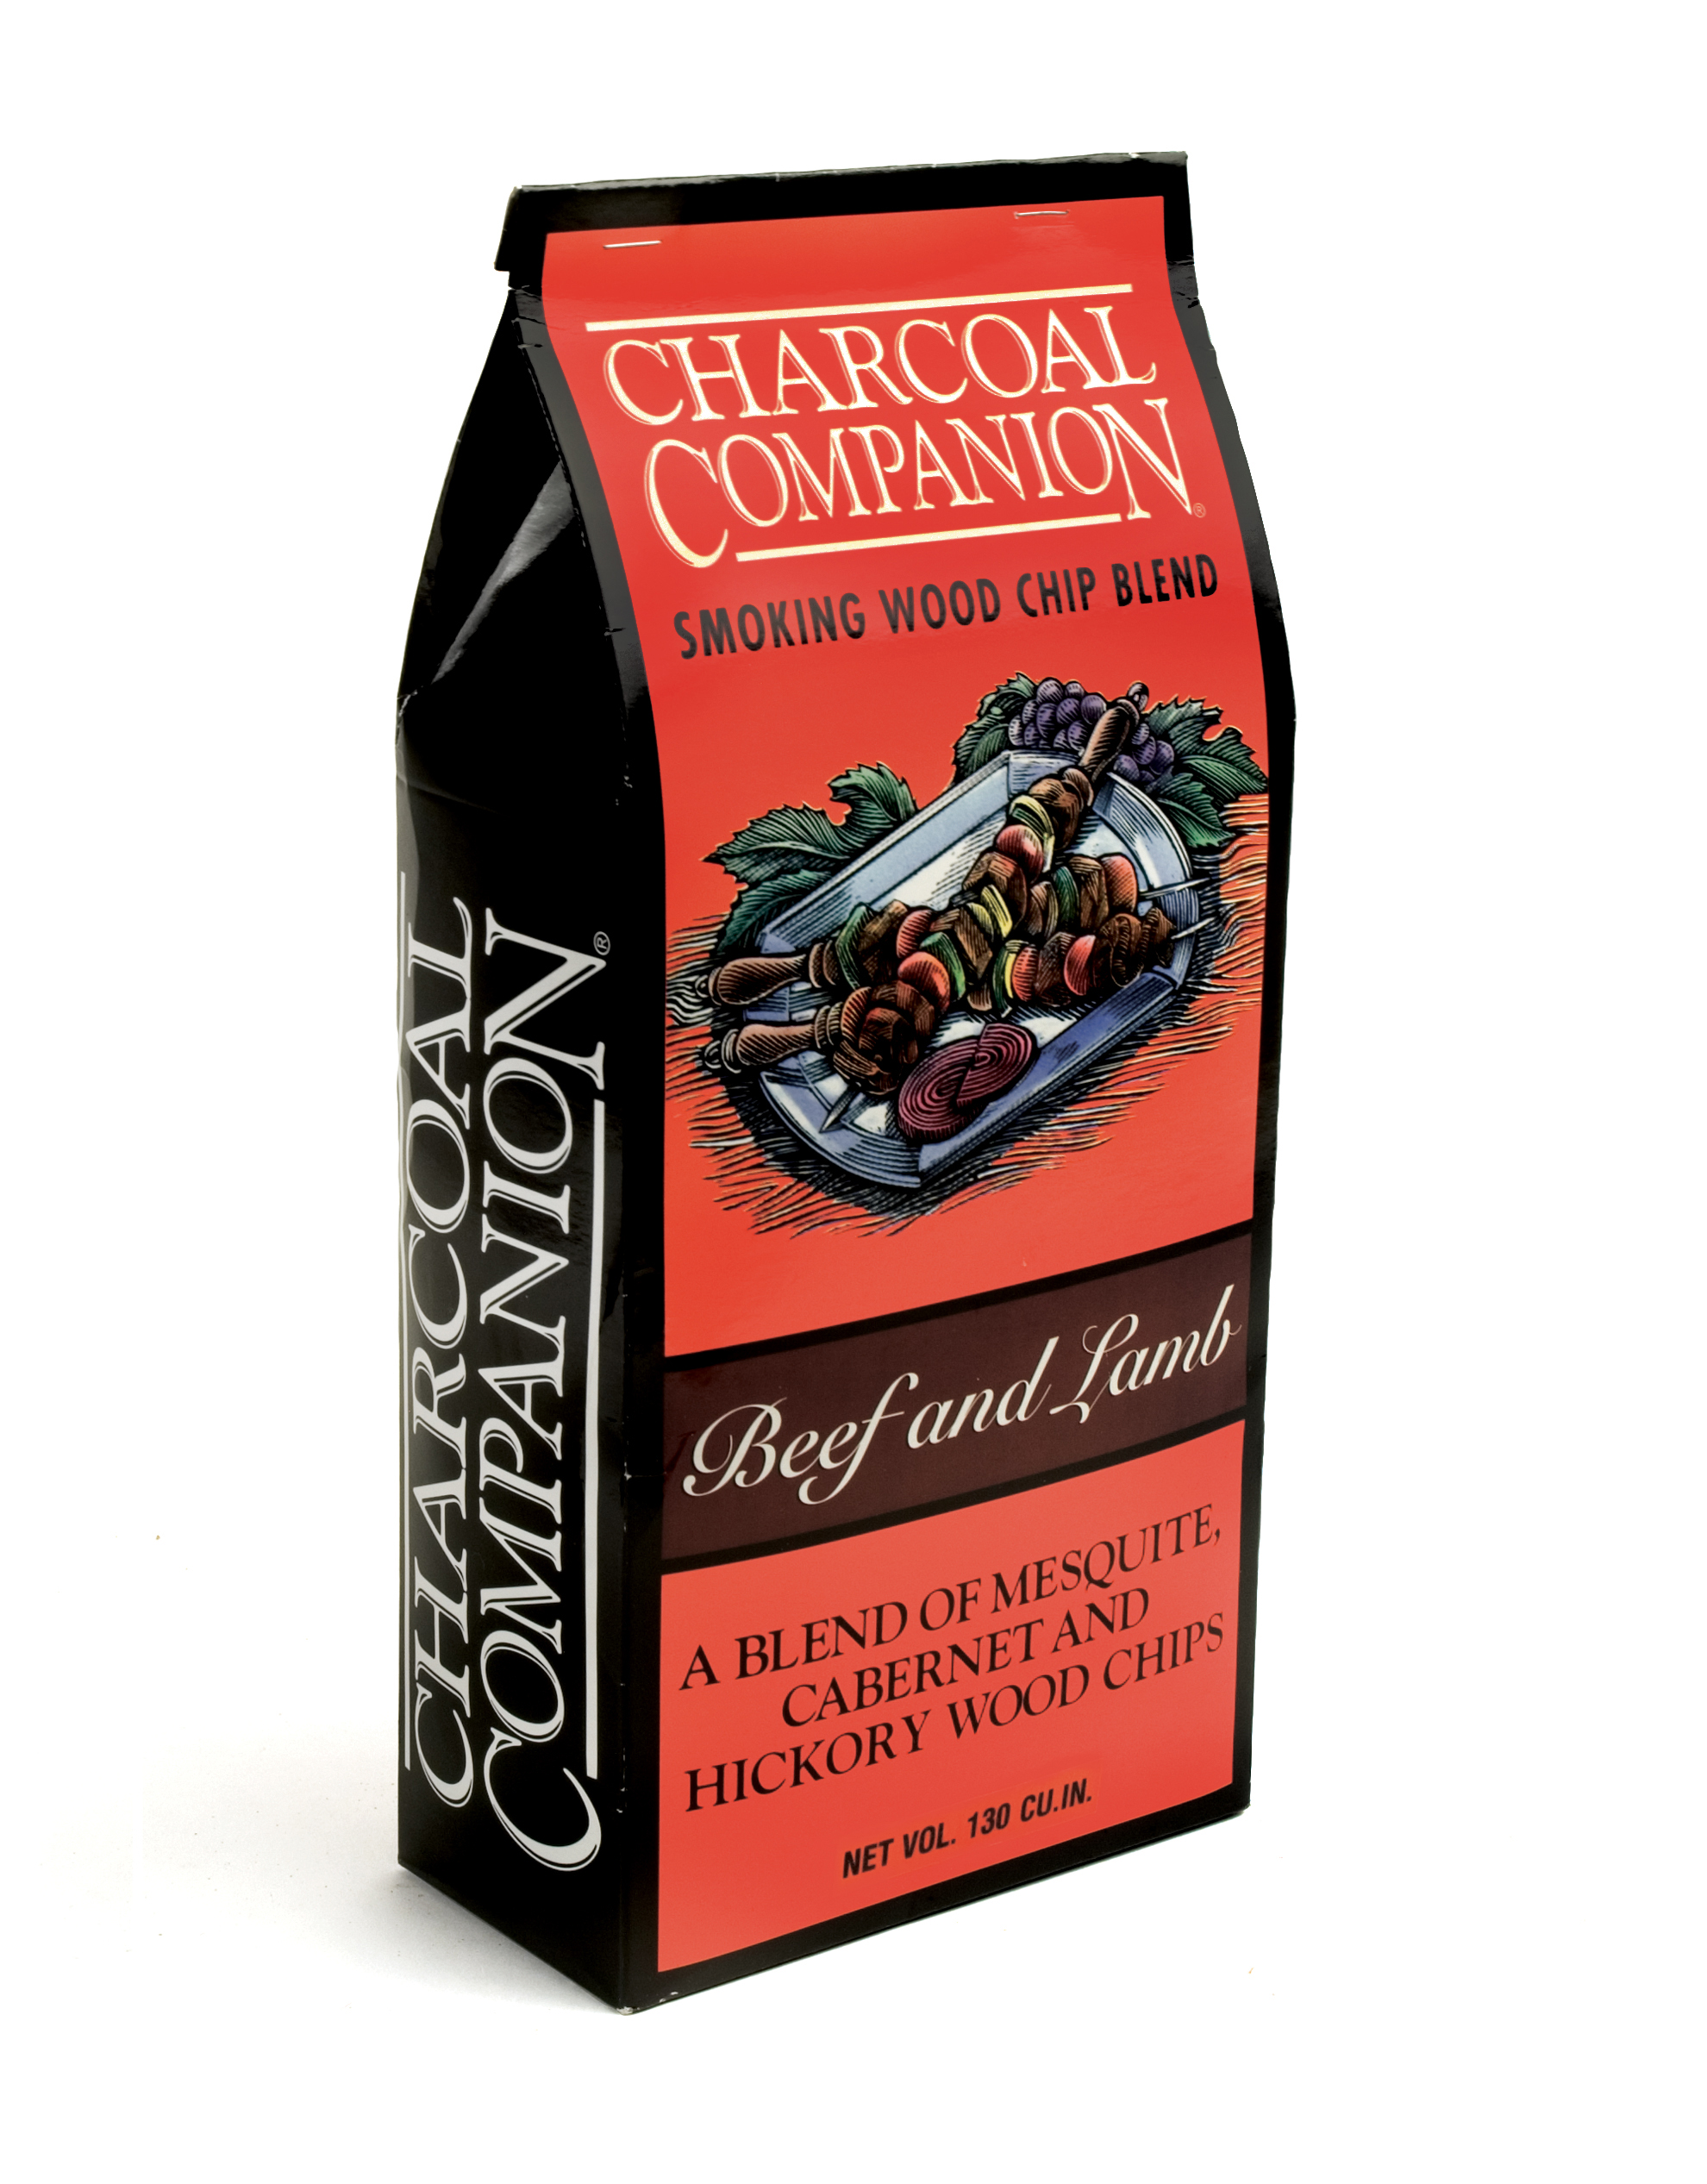 Charcoal Companion CC6014 Beef and Lamb Smoking Wood Chip Blend